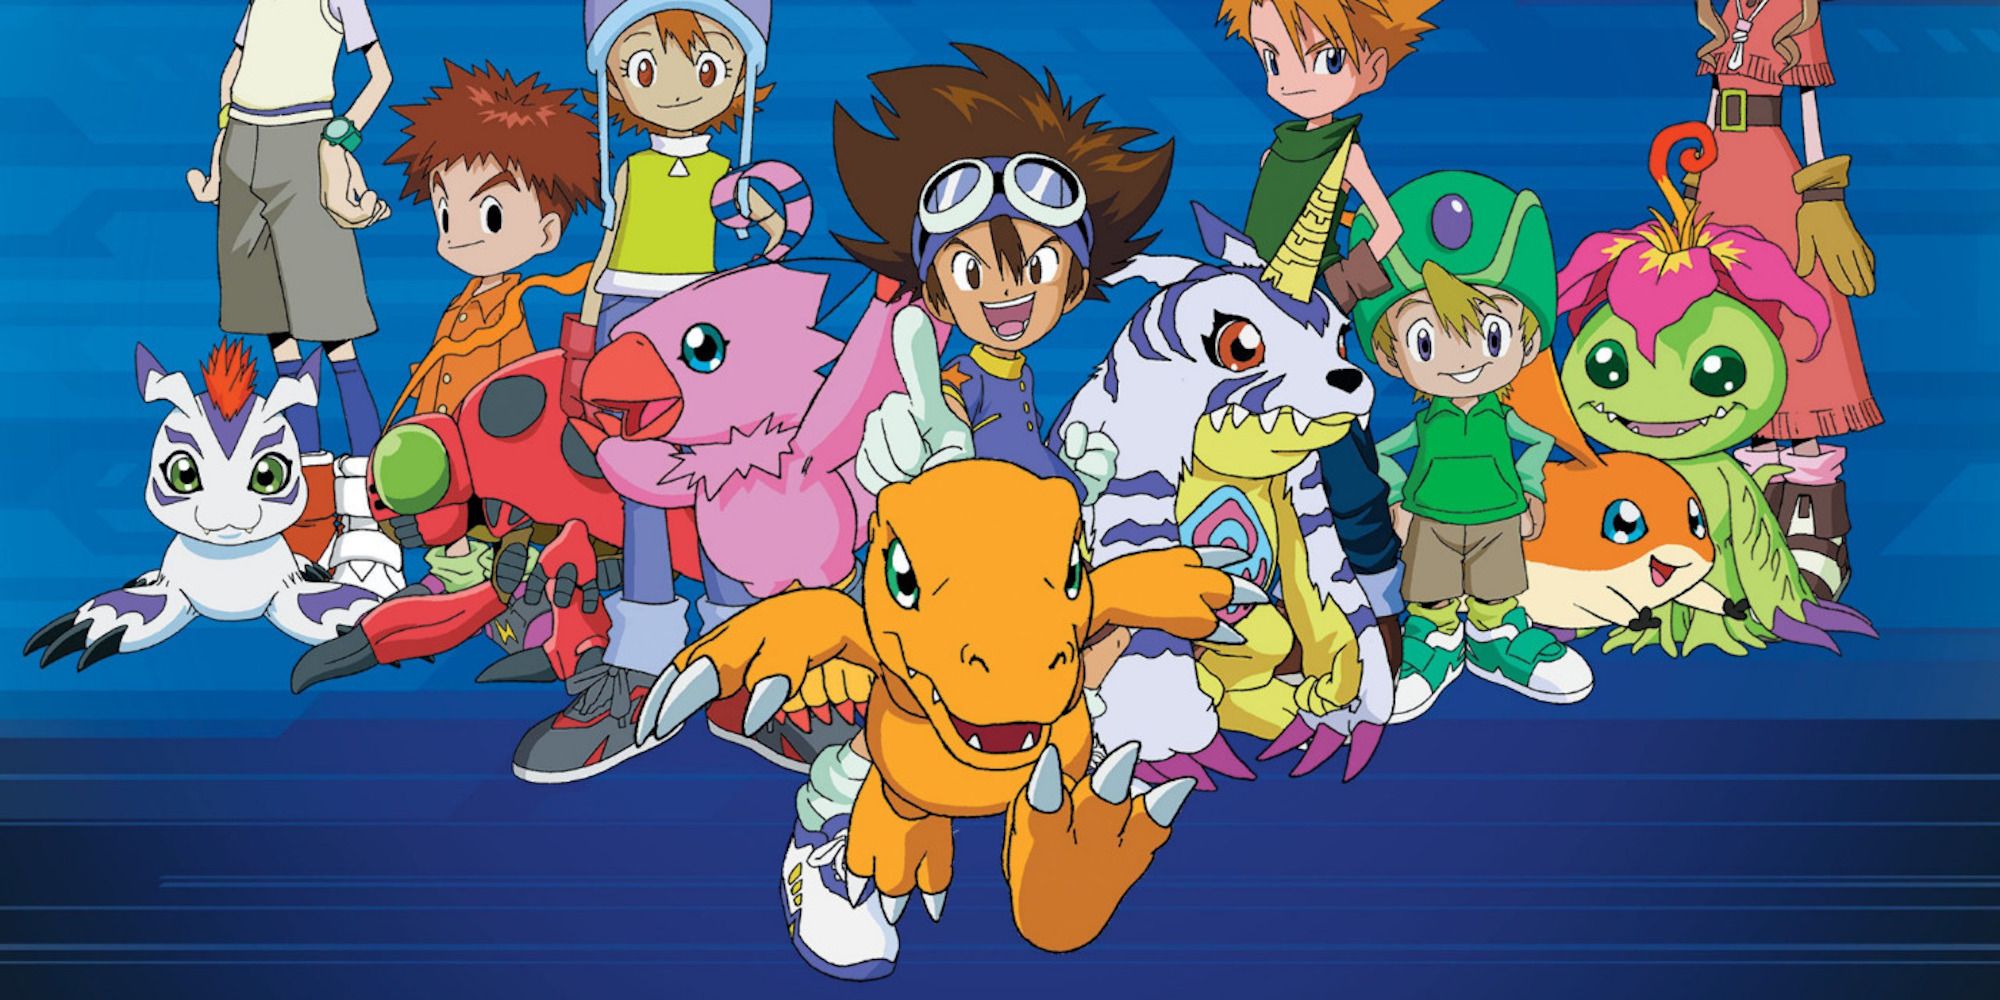 Promo art featuring the cast from Digimon Adventure 